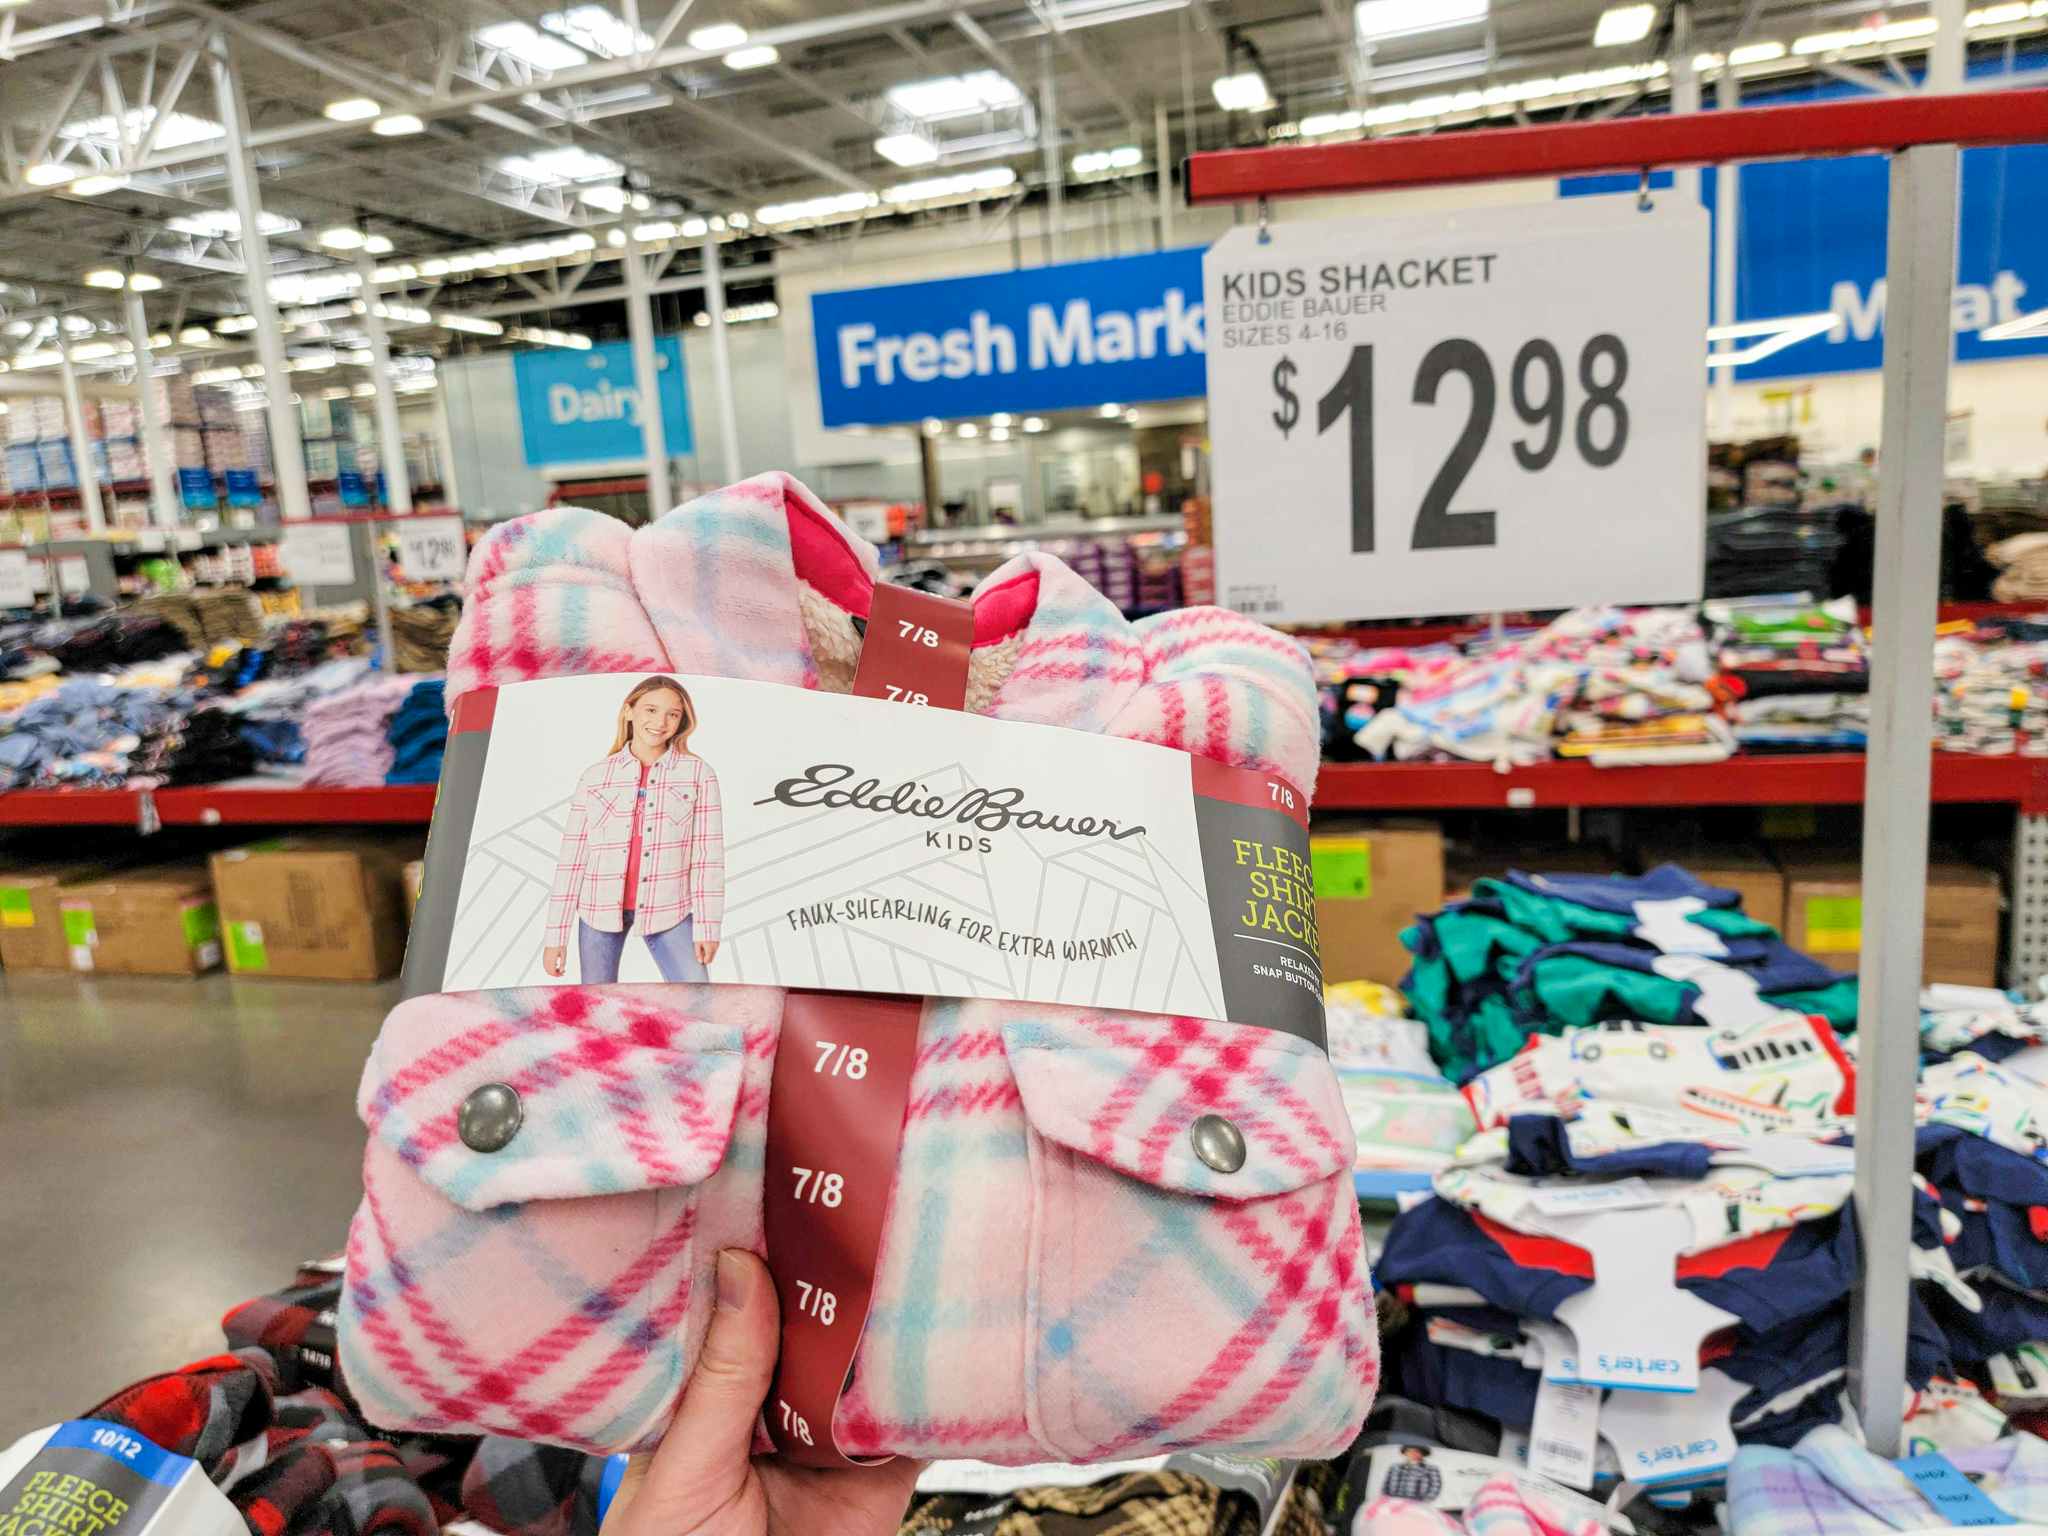 hand holding a pink plaid eddie bauer kids shacket by the price sign for 12.98